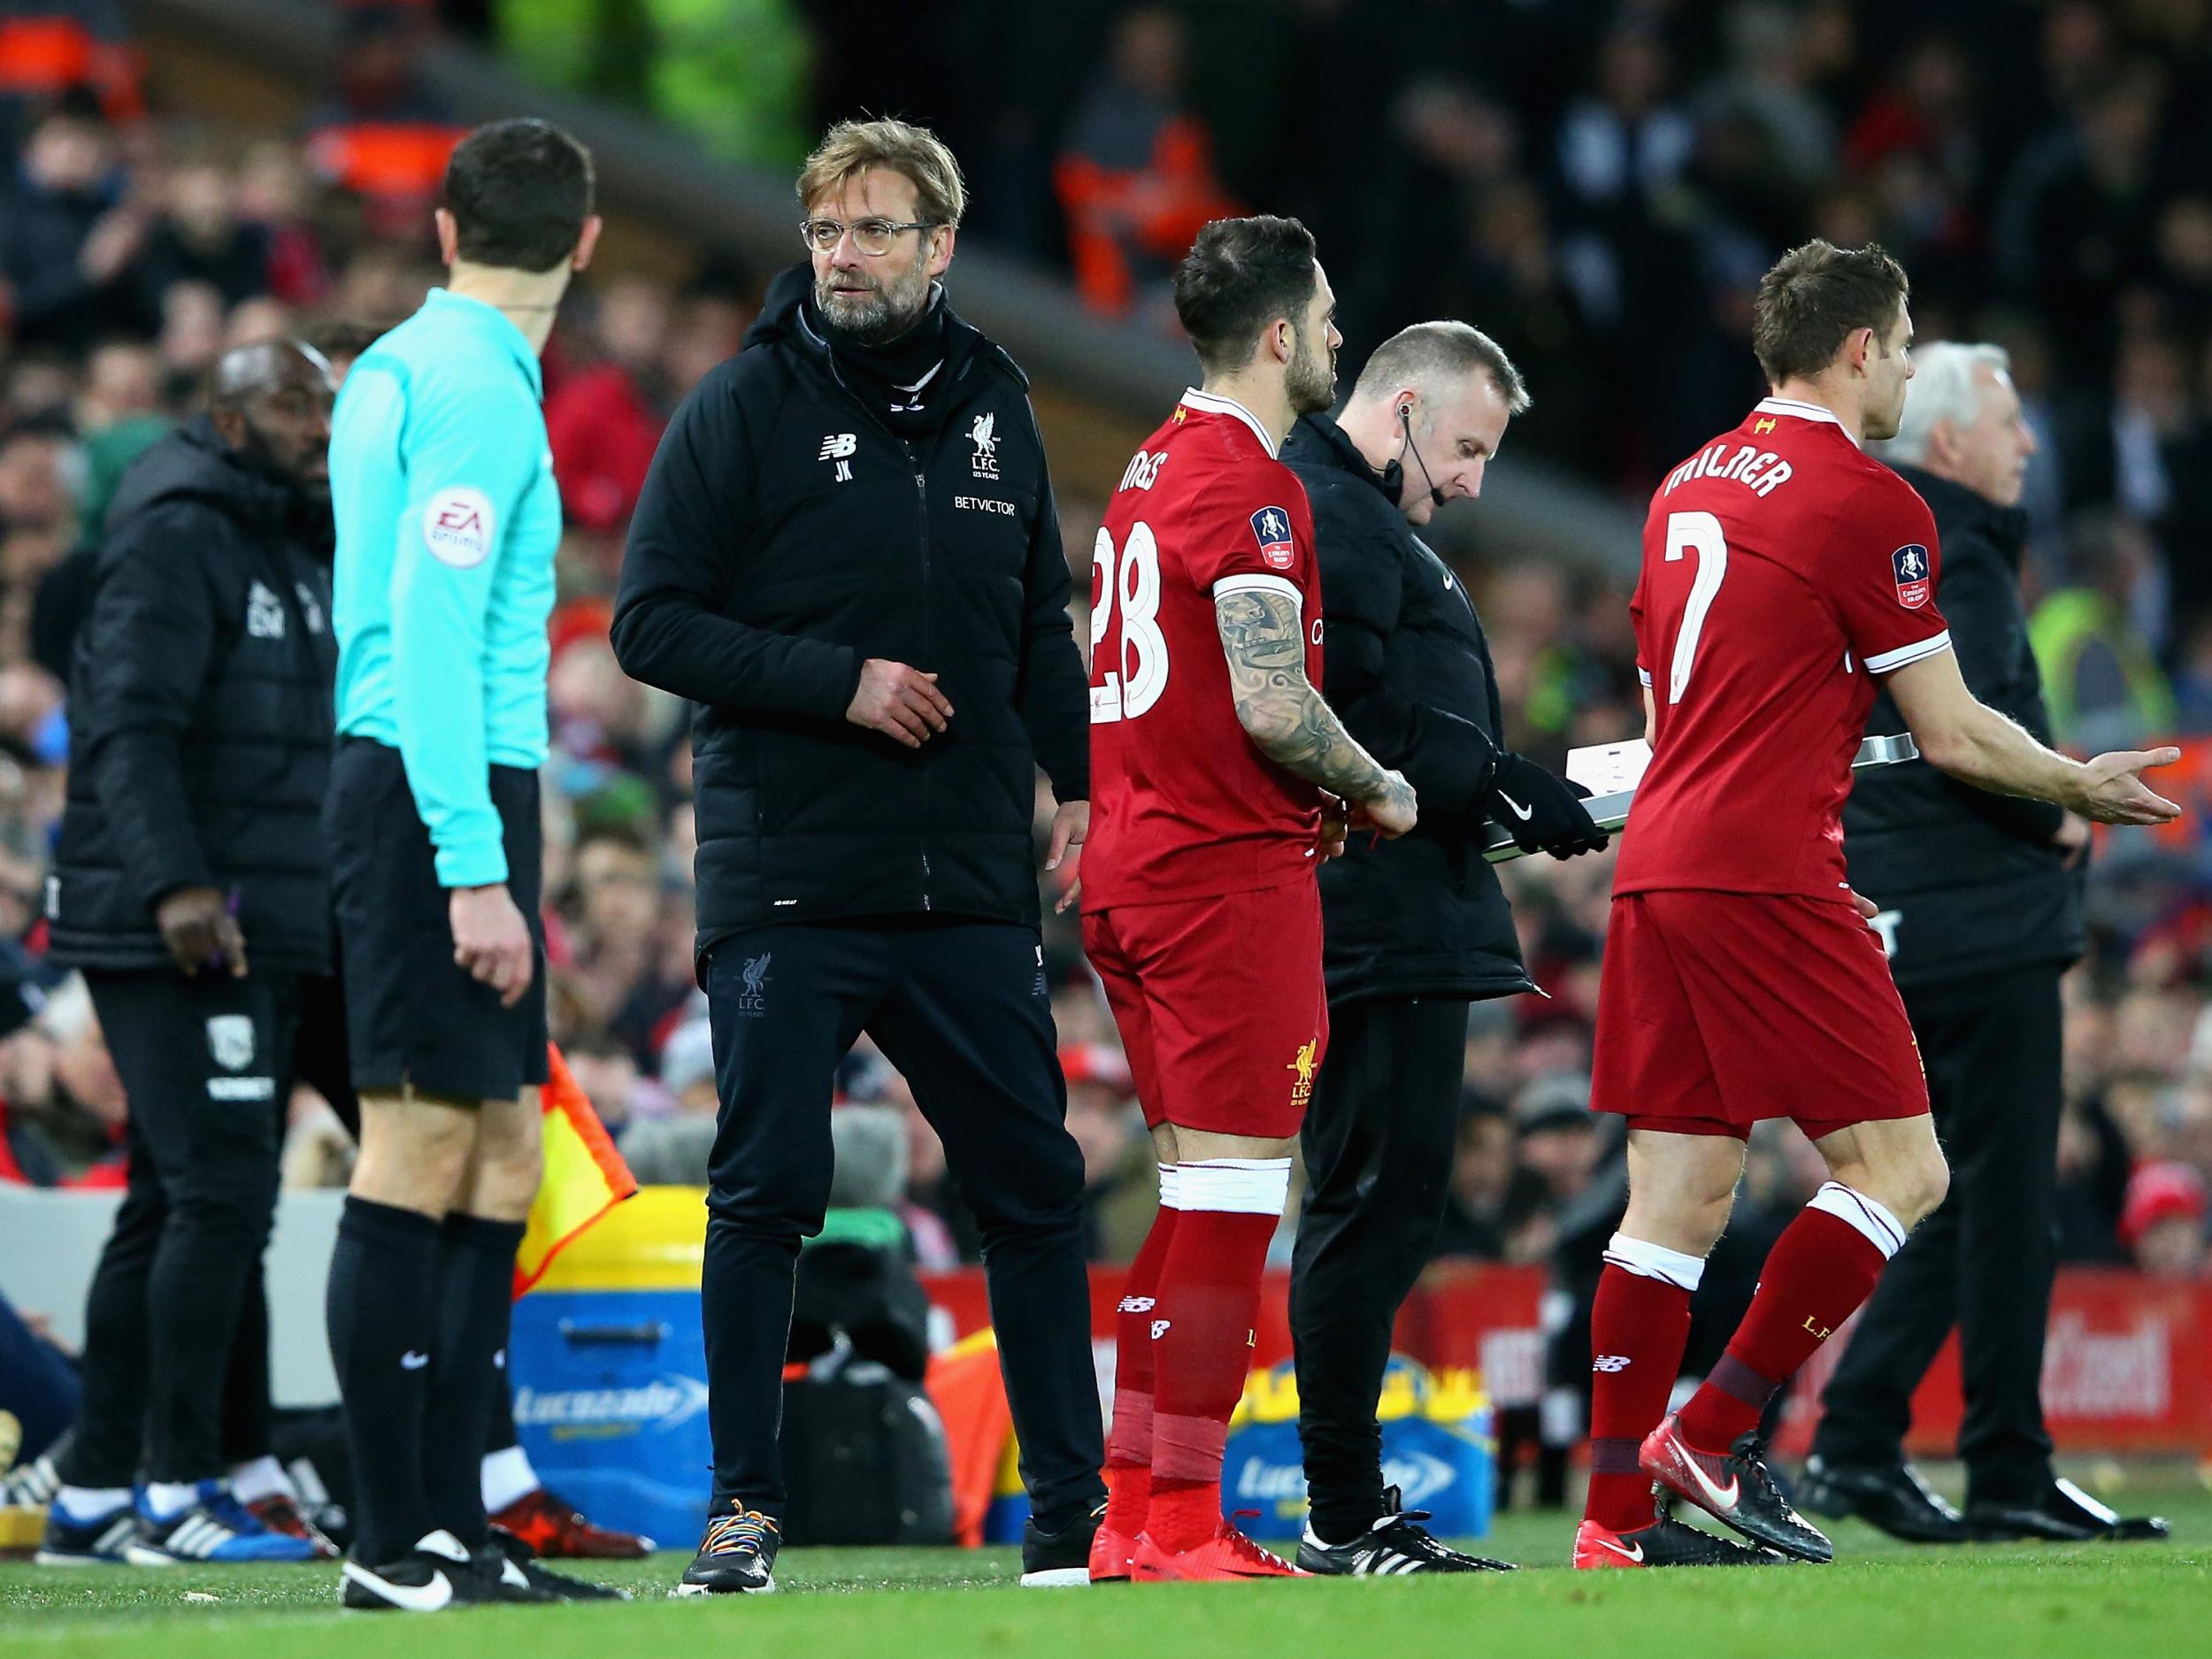 Klopp lamented the repeated errors by his side